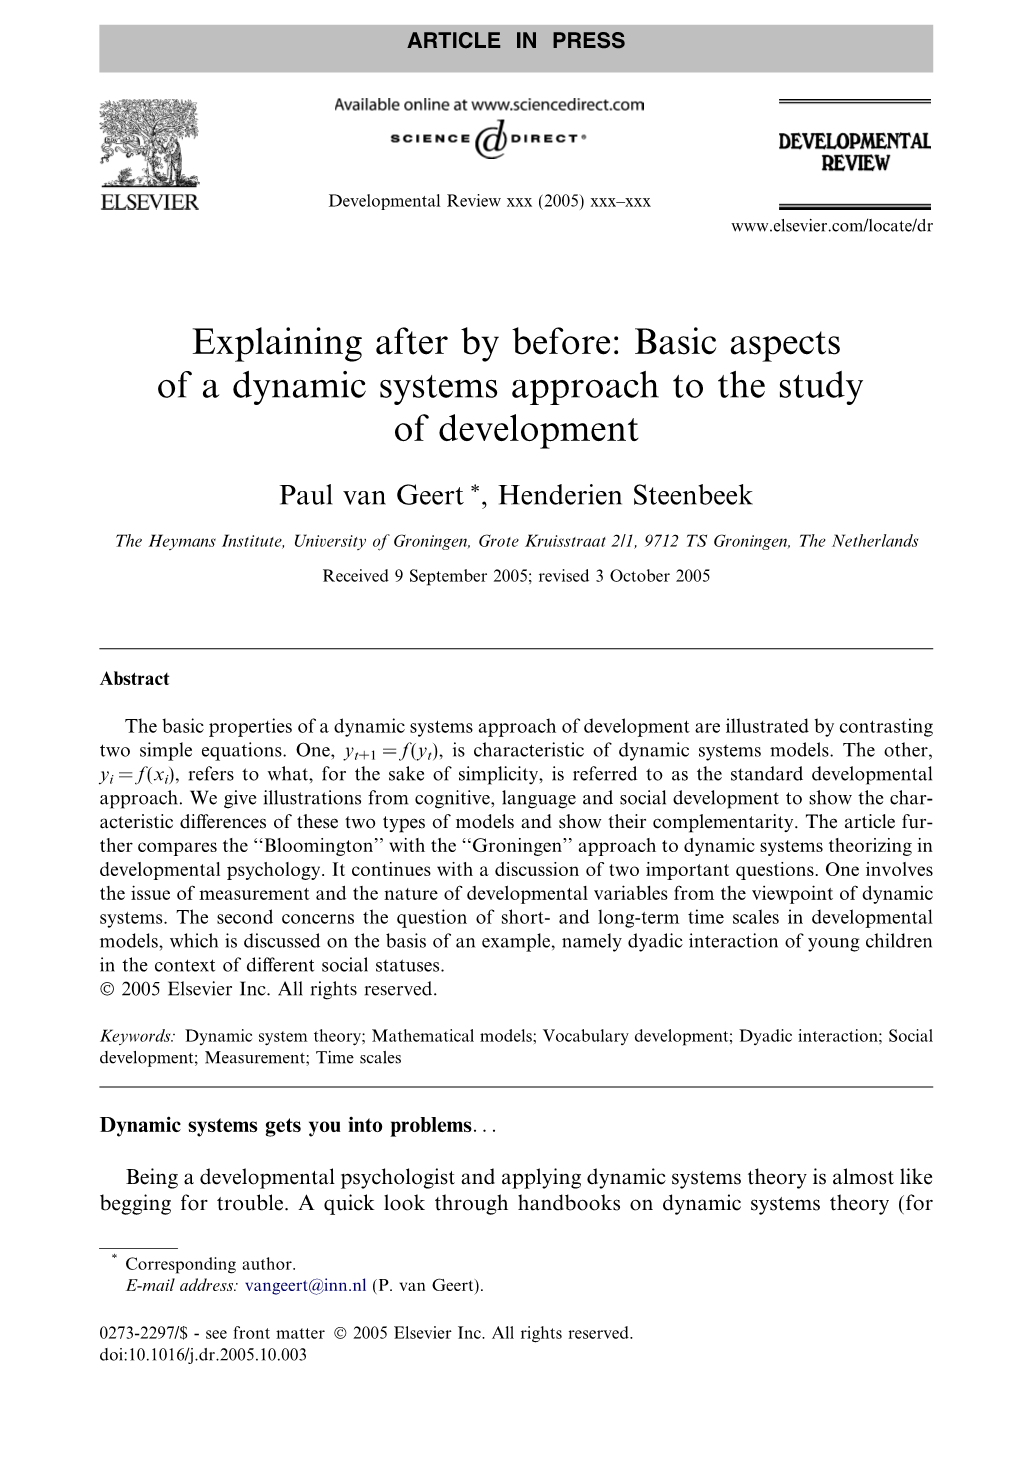 Explaining After by Before: Basic Aspects of a Dynamic Systems Approach to the Study of Development